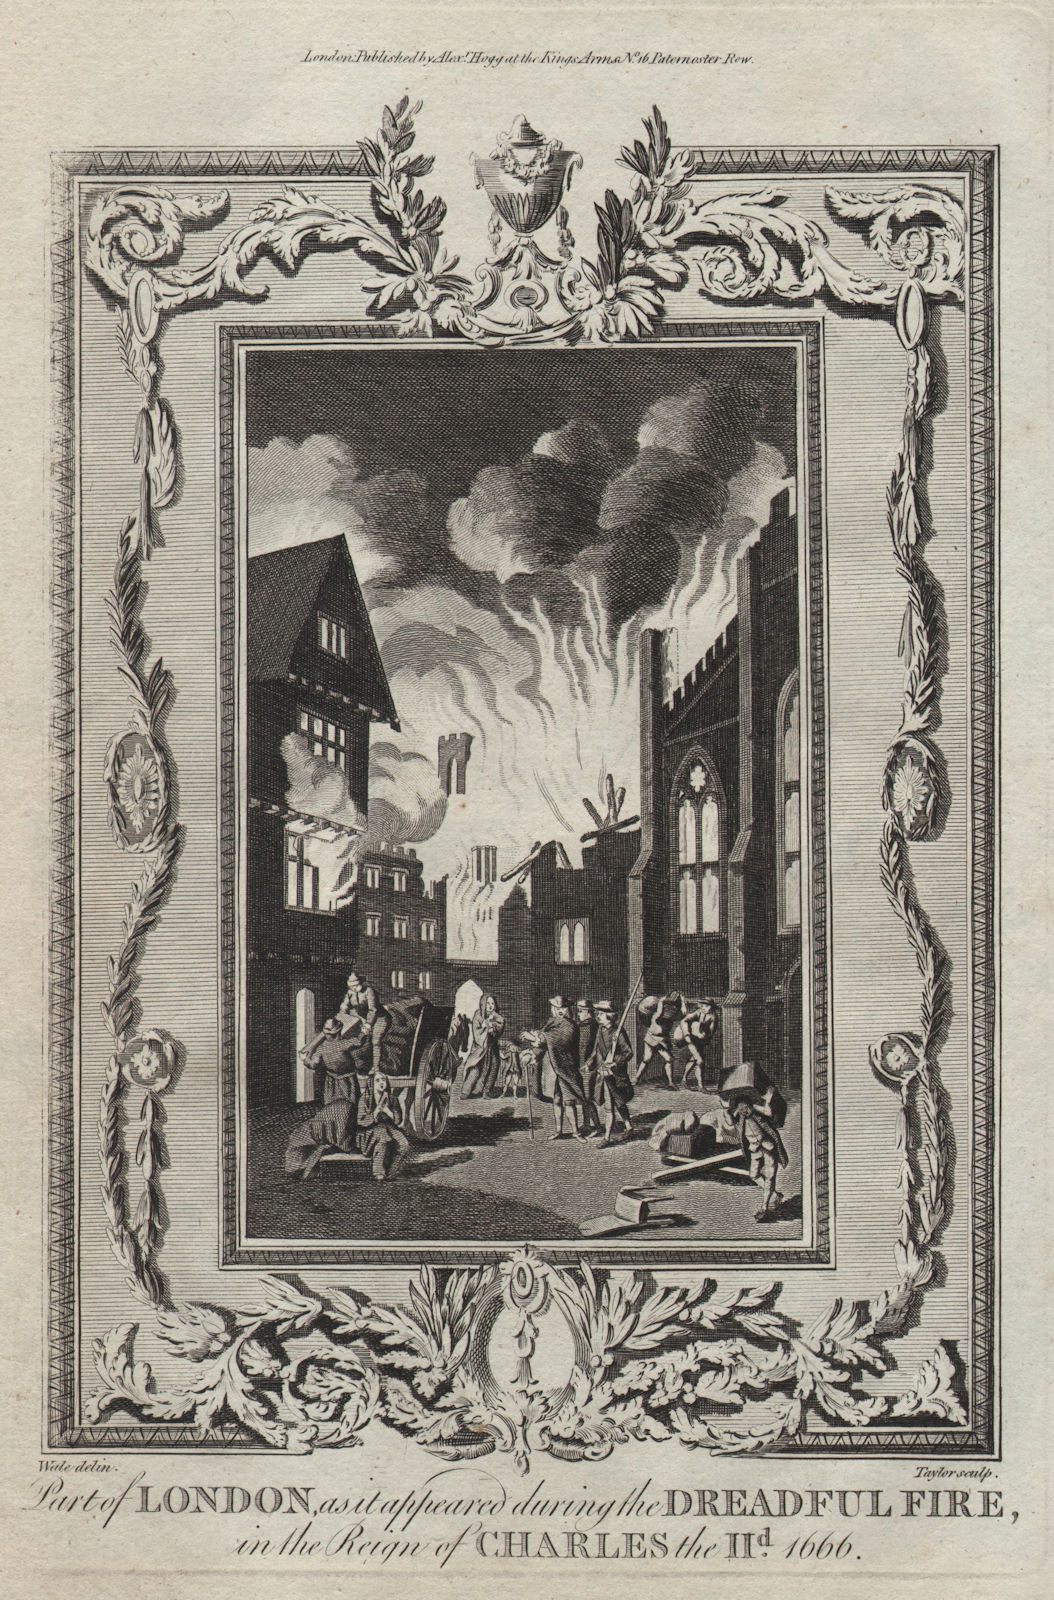 Associate Product Part of London, as it appeared in the dreadful Great Fire of 1666. THORNTON 1784